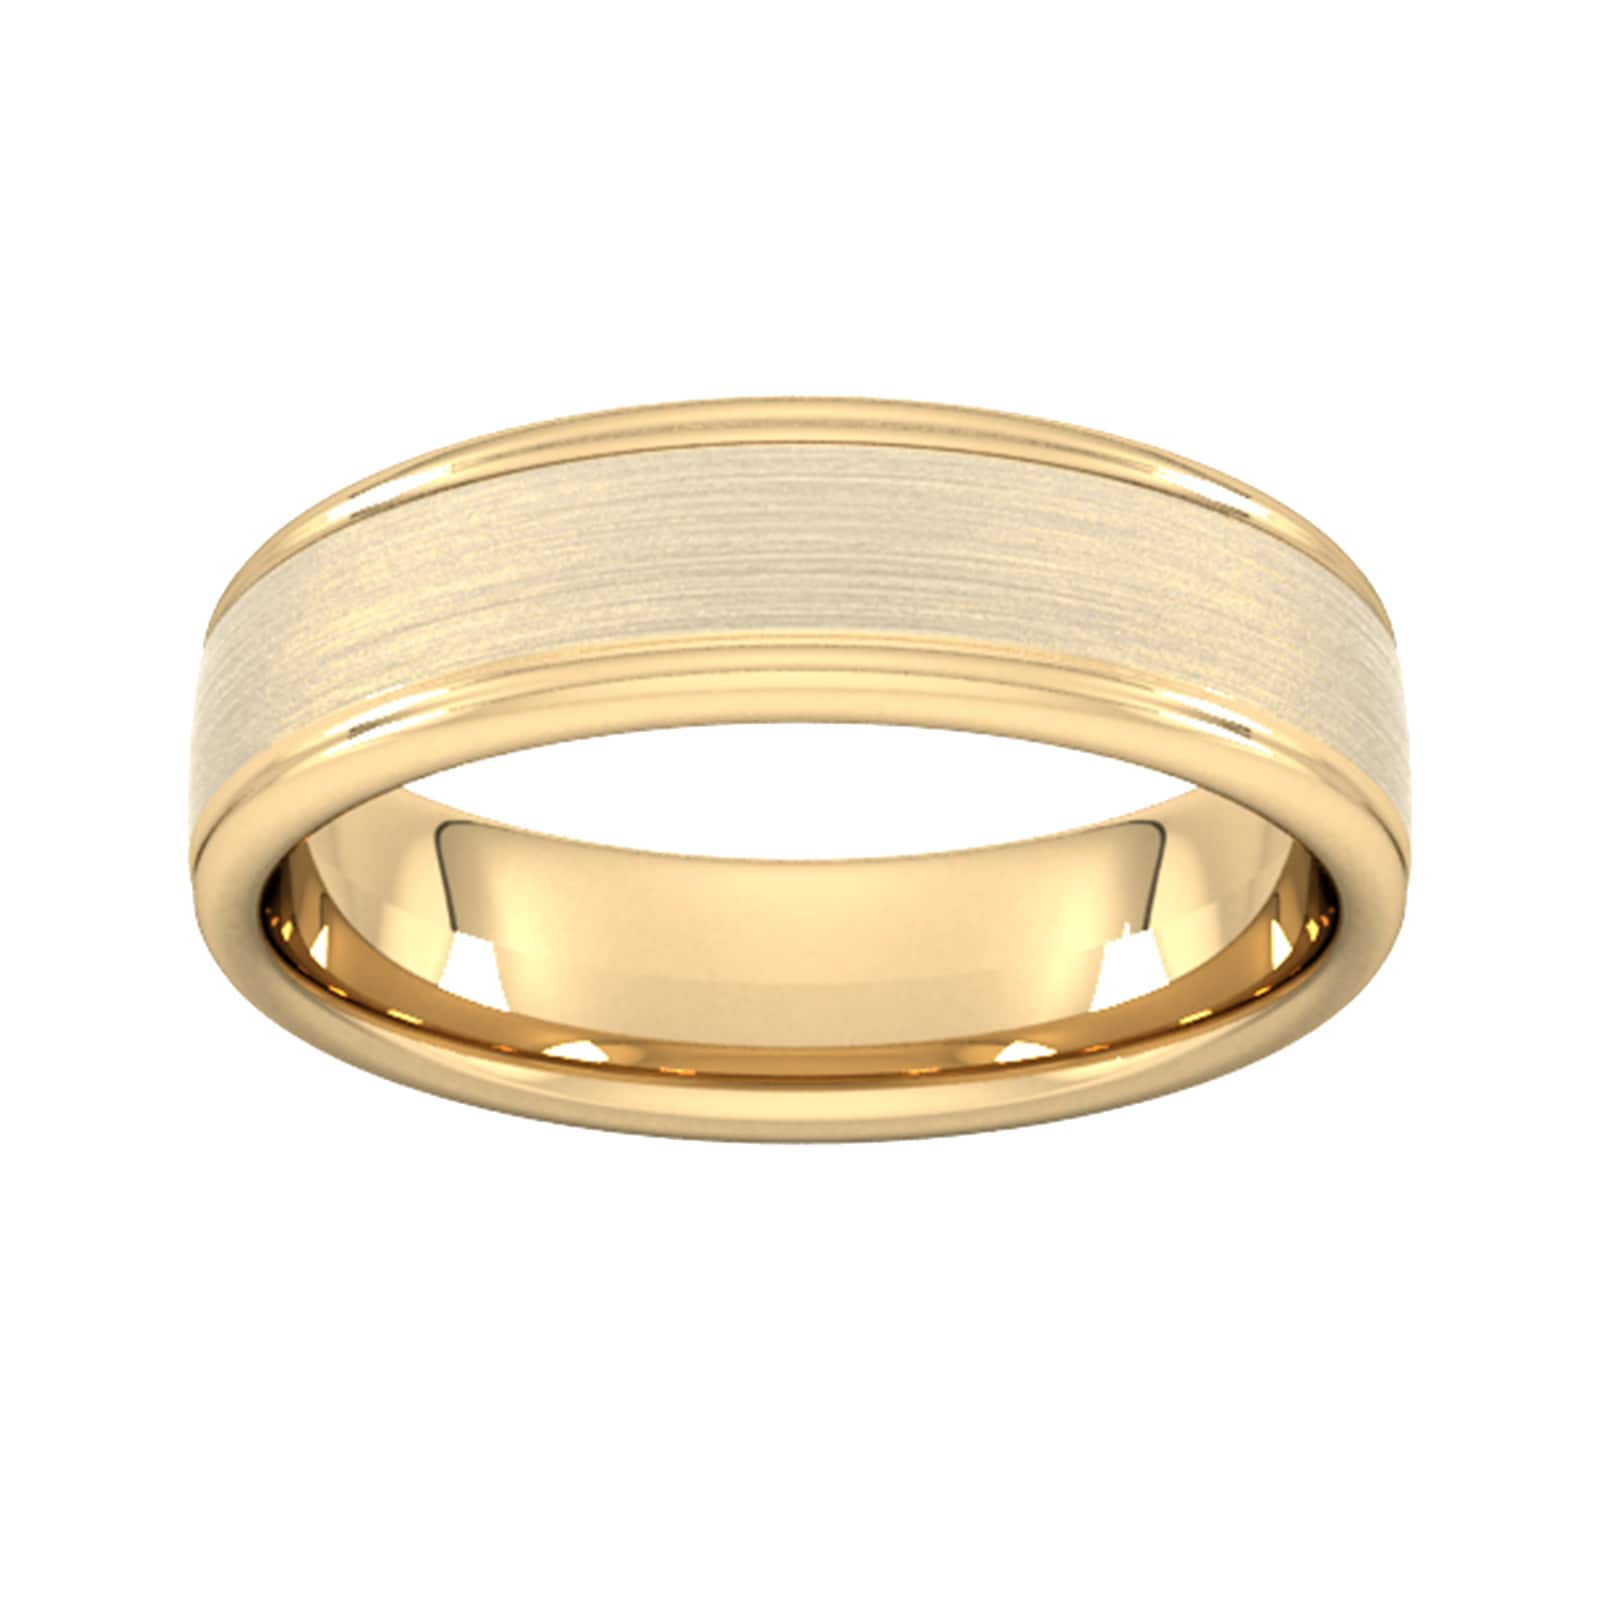 6mm Slight Court Standard Matt Centre With Grooves Wedding Ring In 18 Carat Yellow Gold - Ring Size U